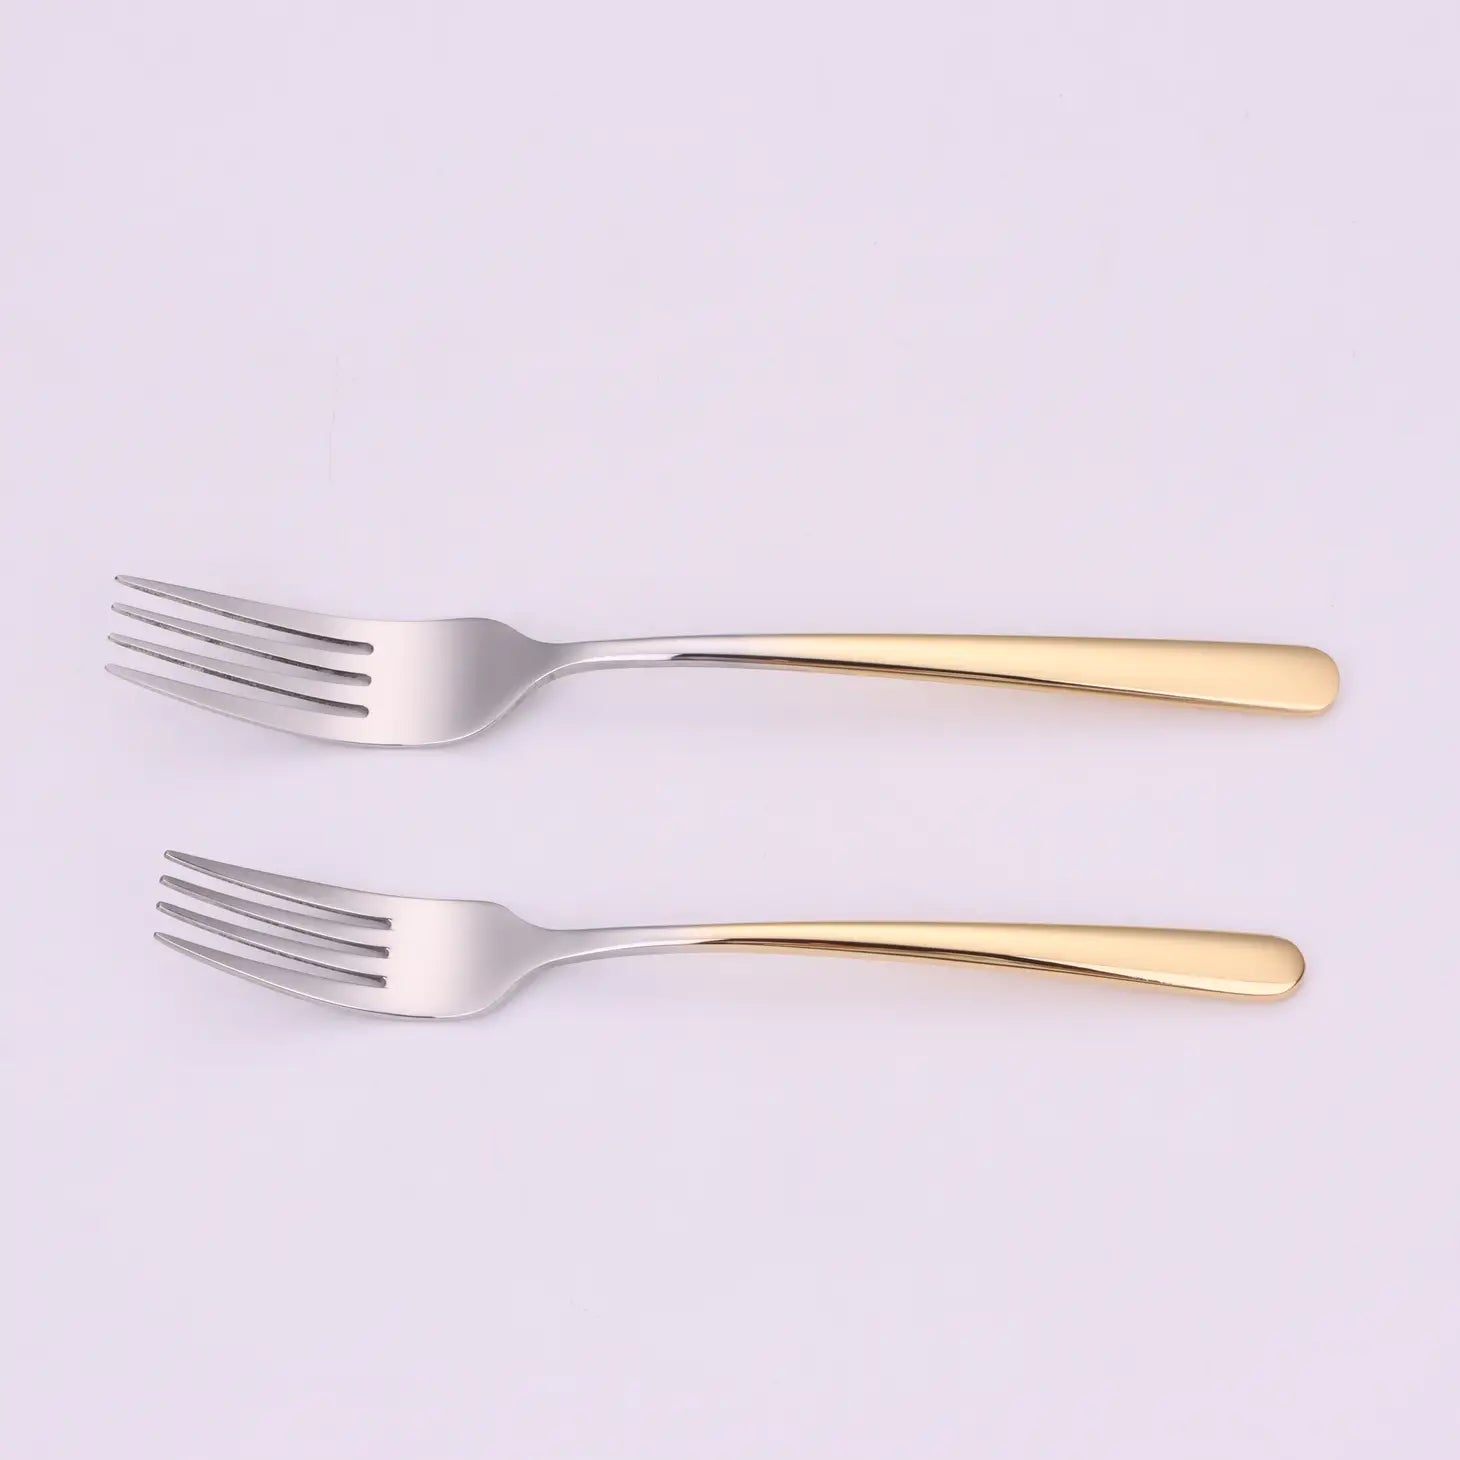 Gold & Silver Flatware Set, Service For 4 Cutlery High Class Touch - Home Decor 